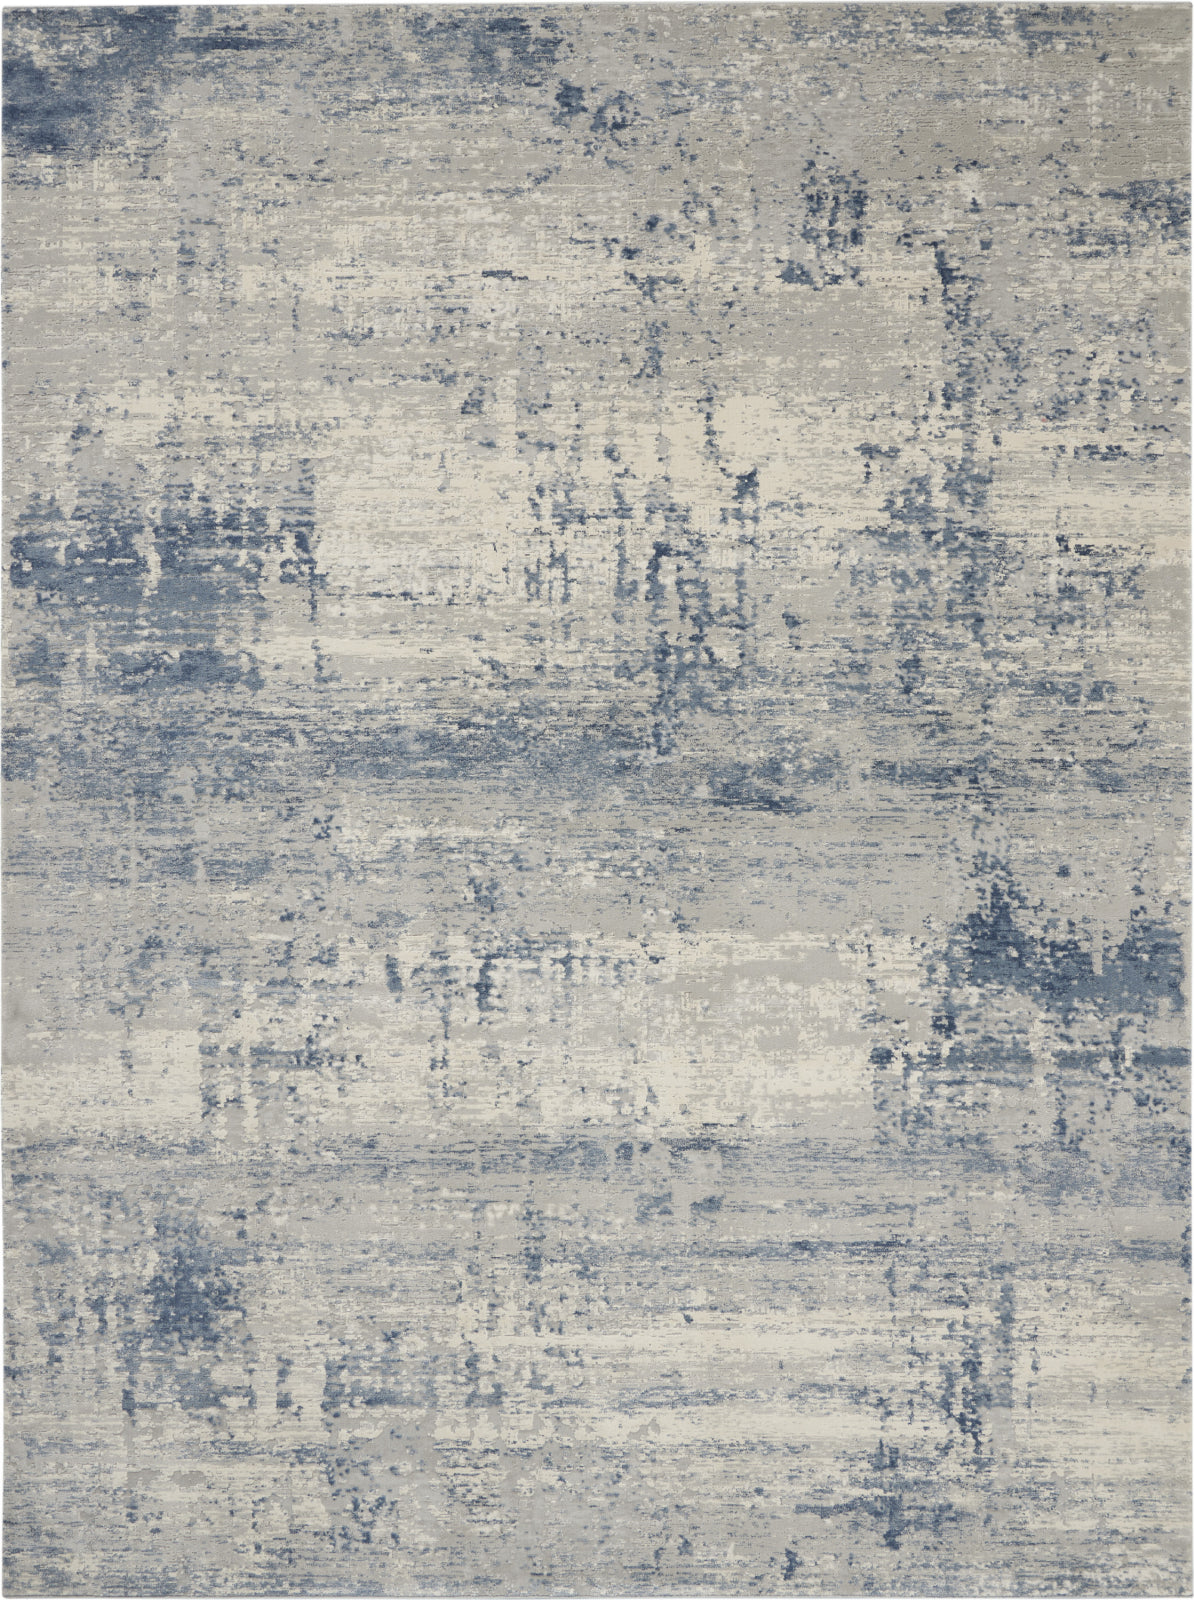 Rustic Textures RUS10 Ivory/Blue Area Rug by Nourison